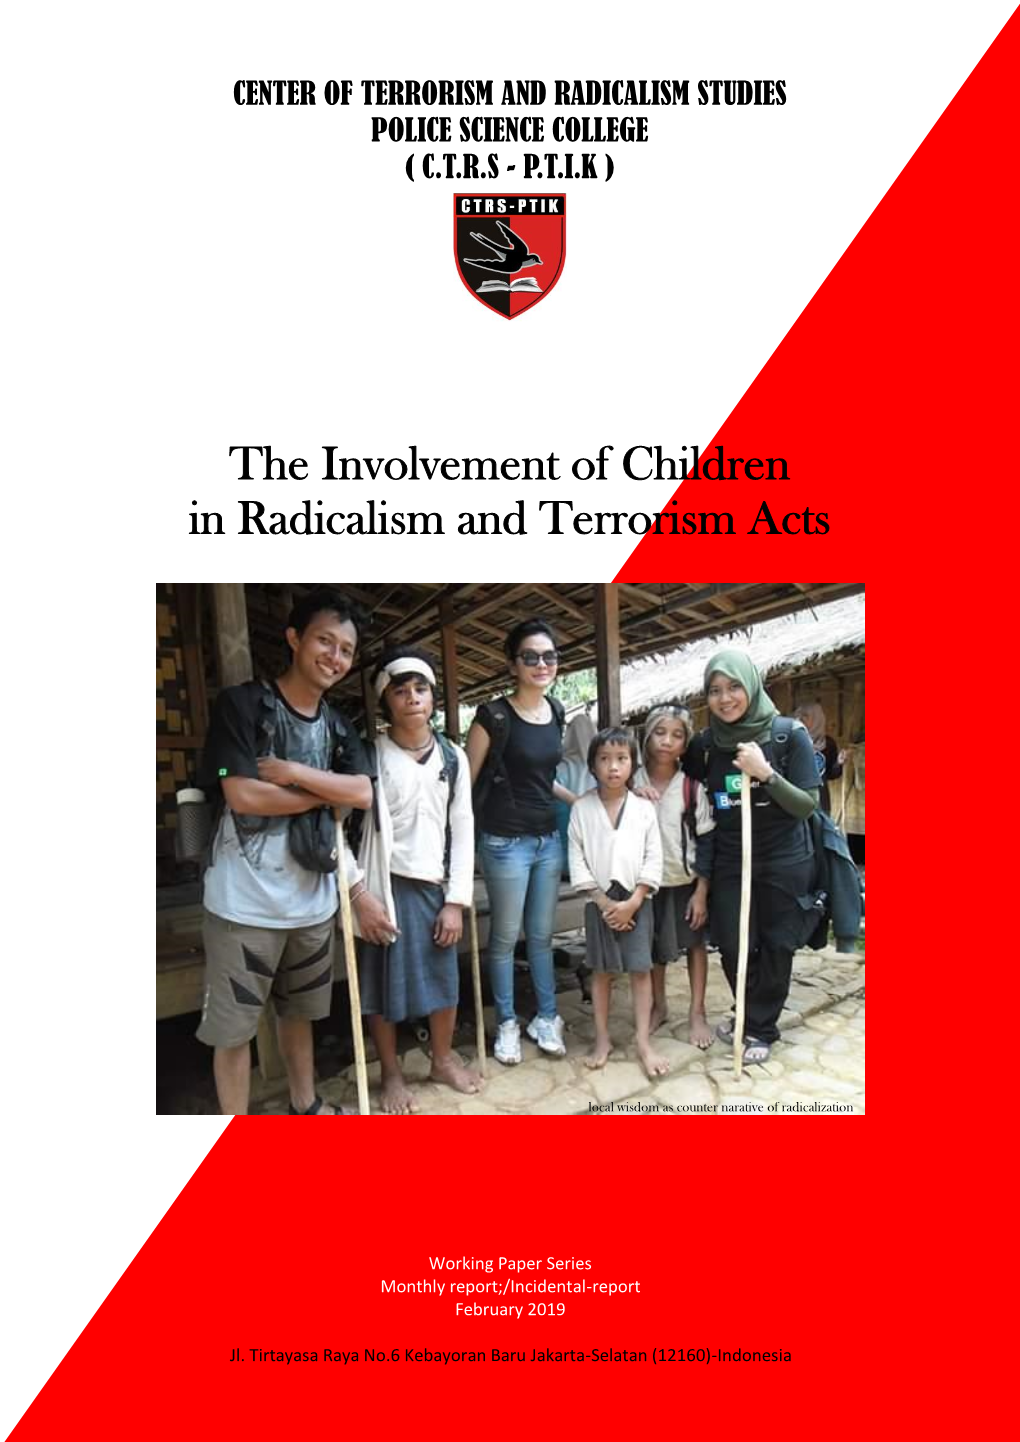 The Involvement of Children in Radicalism and Terrorism Acts